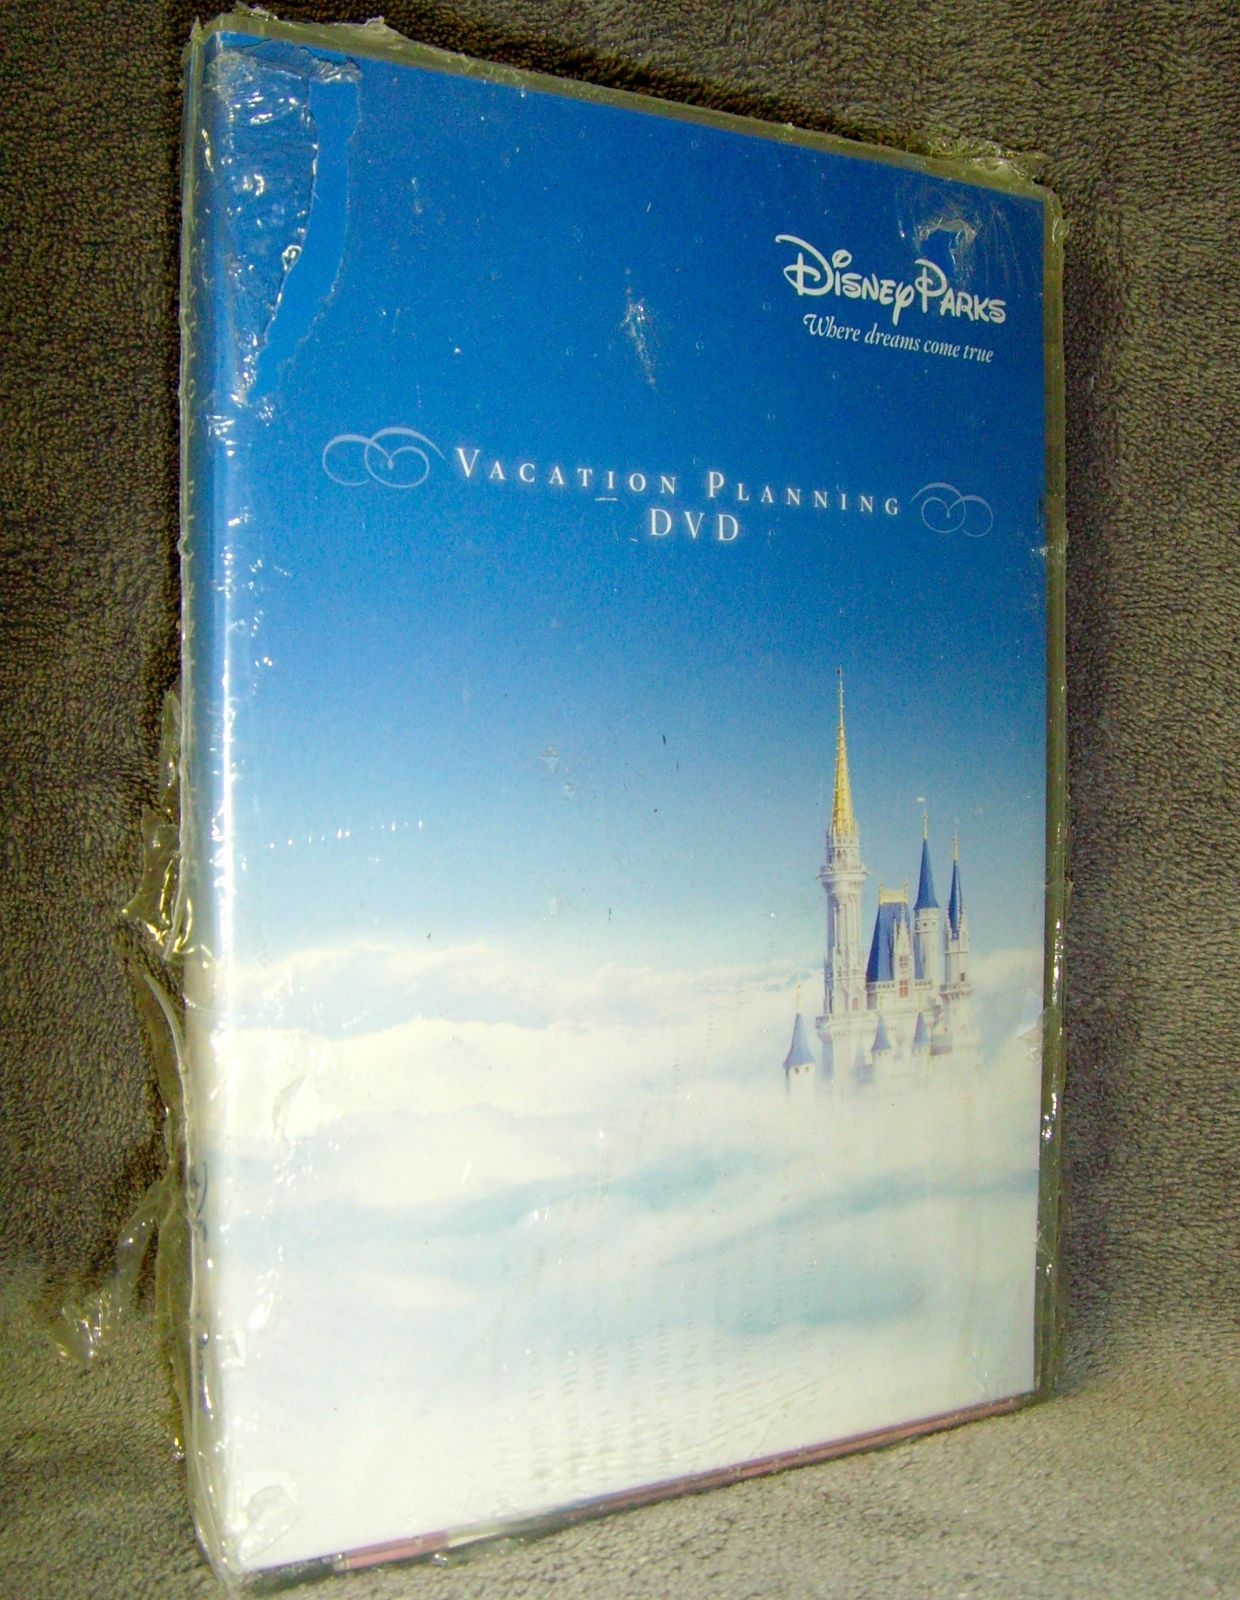 Primary image for Disney Parks: Where Dreams Come True - Vacation Planning DVD (DVD, 2007) NEW!